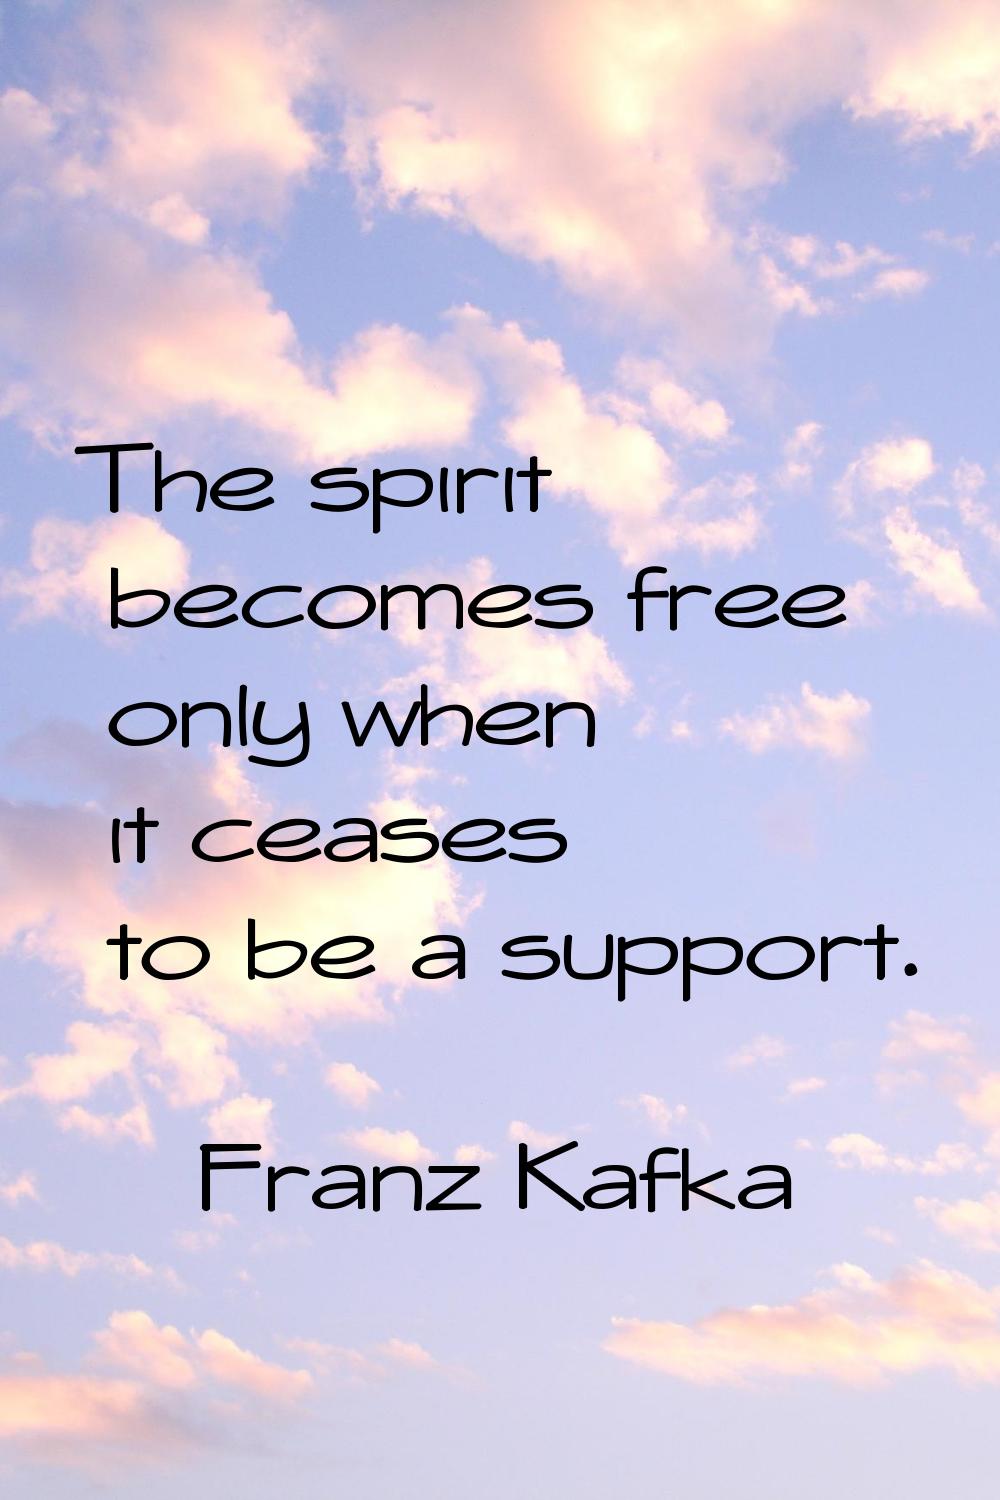 The spirit becomes free only when it ceases to be a support.